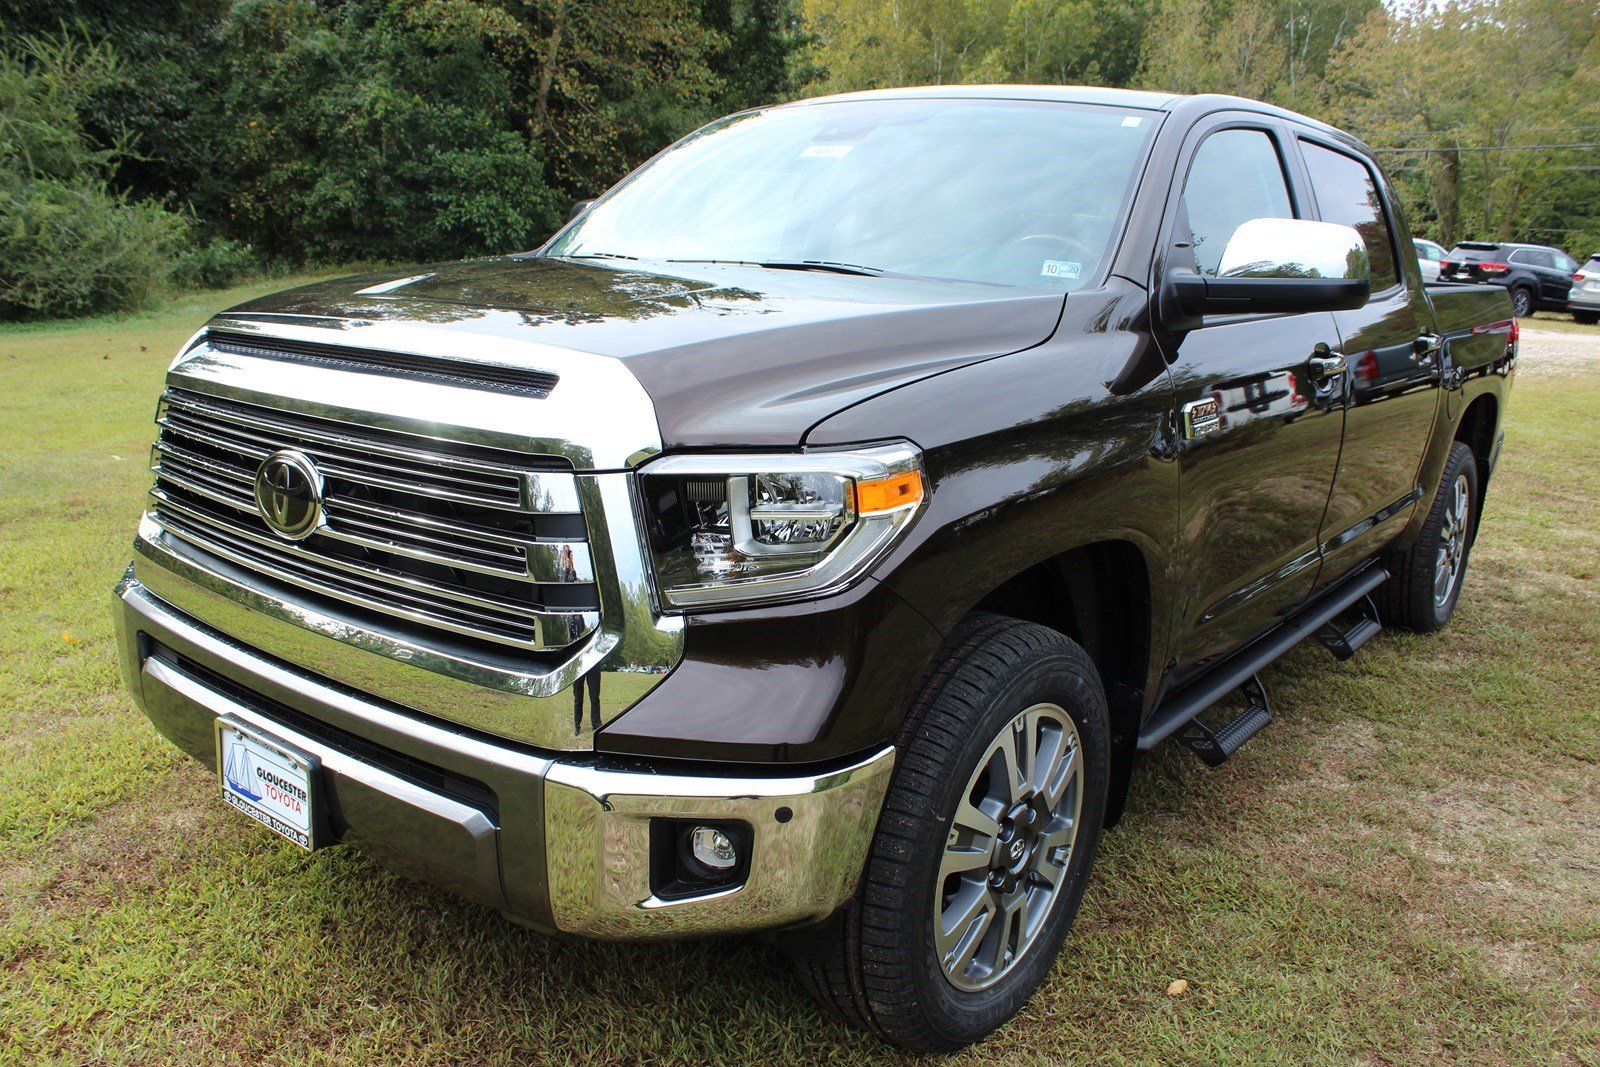 New 2020 Toyota Tundra 4WD 1794 Edition Crew Cab Pickup in Gloucester